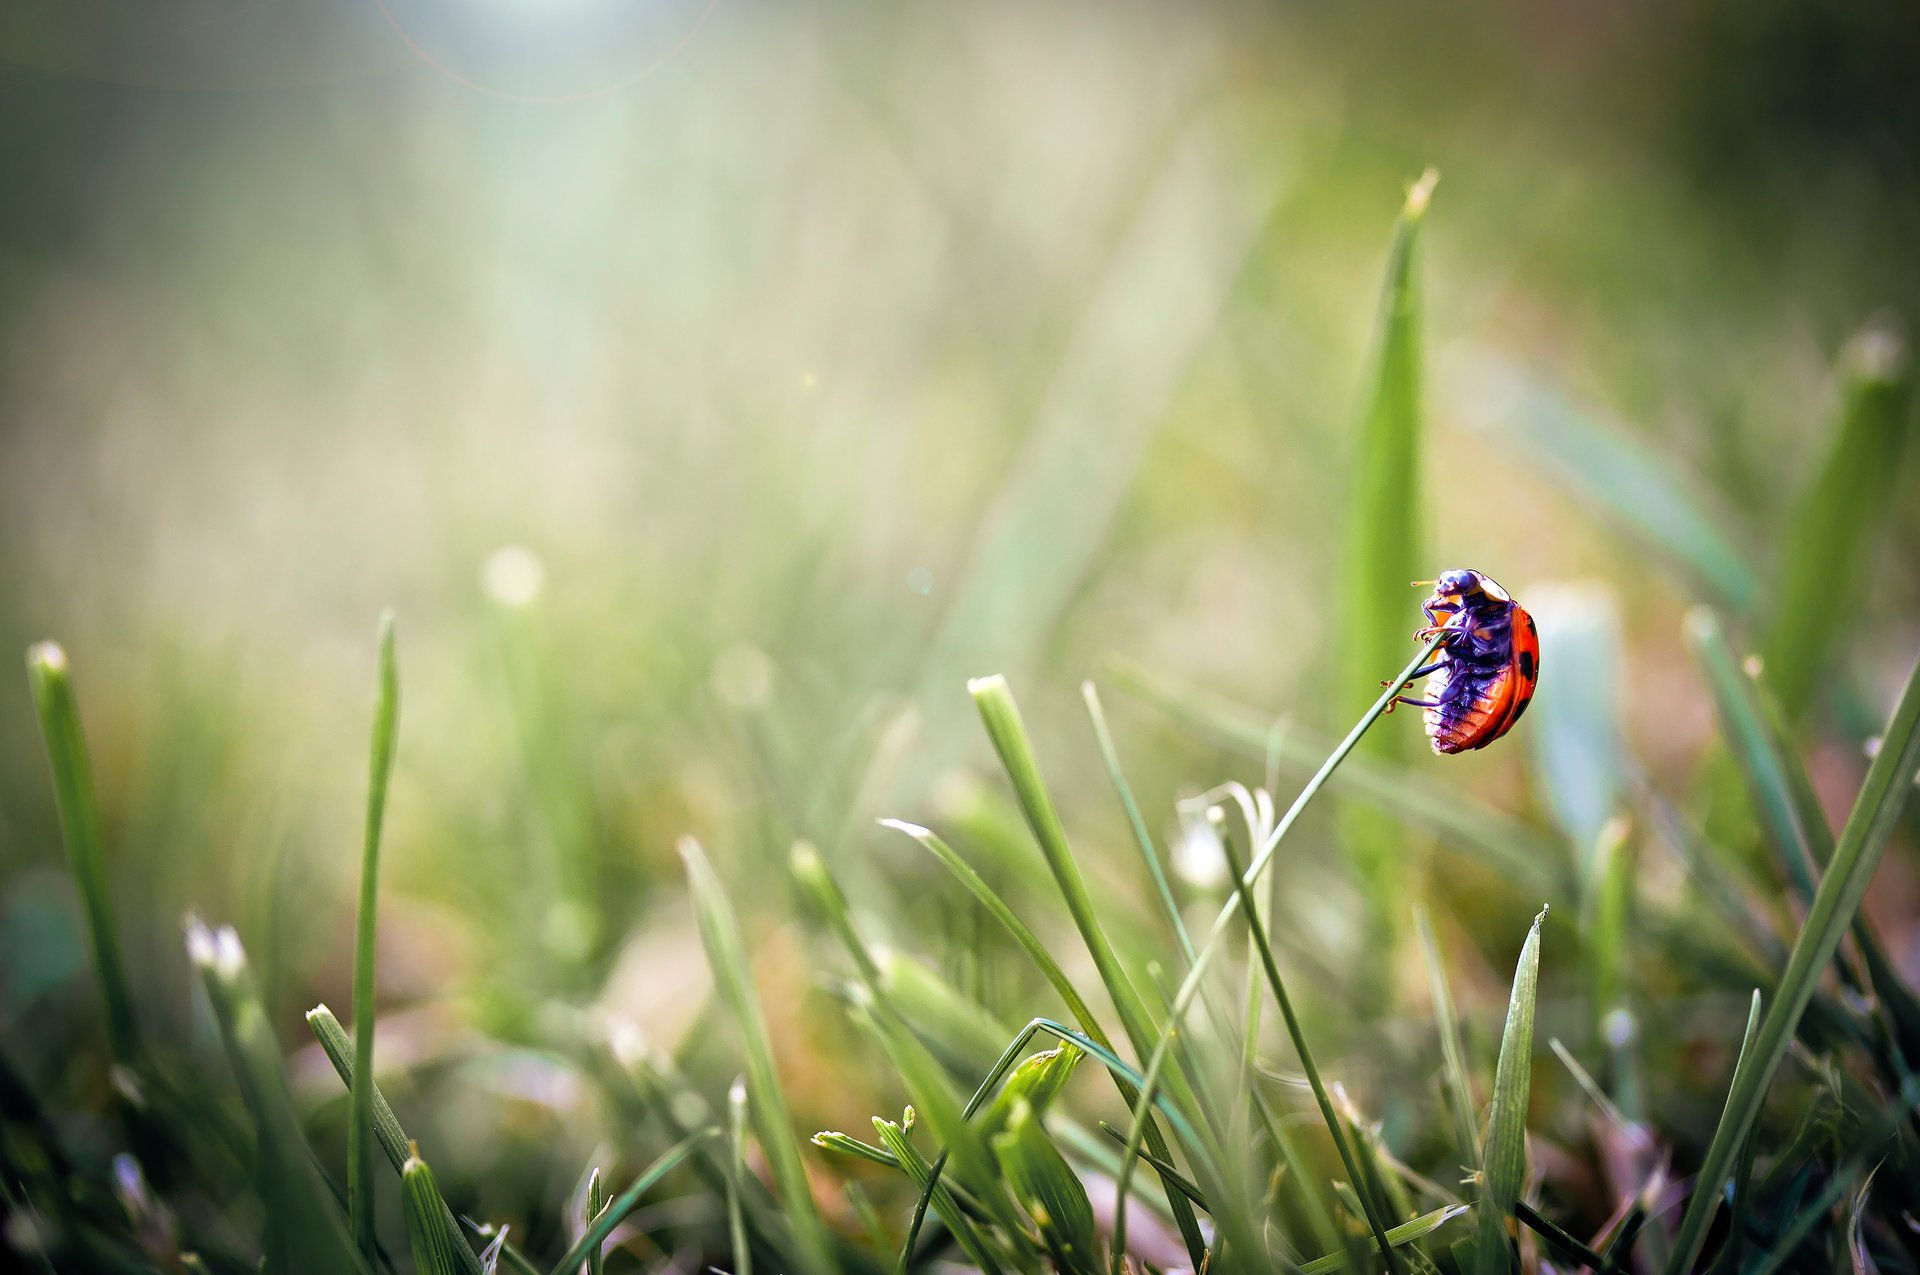 Macro photo of a ladybug on the tip of the grass